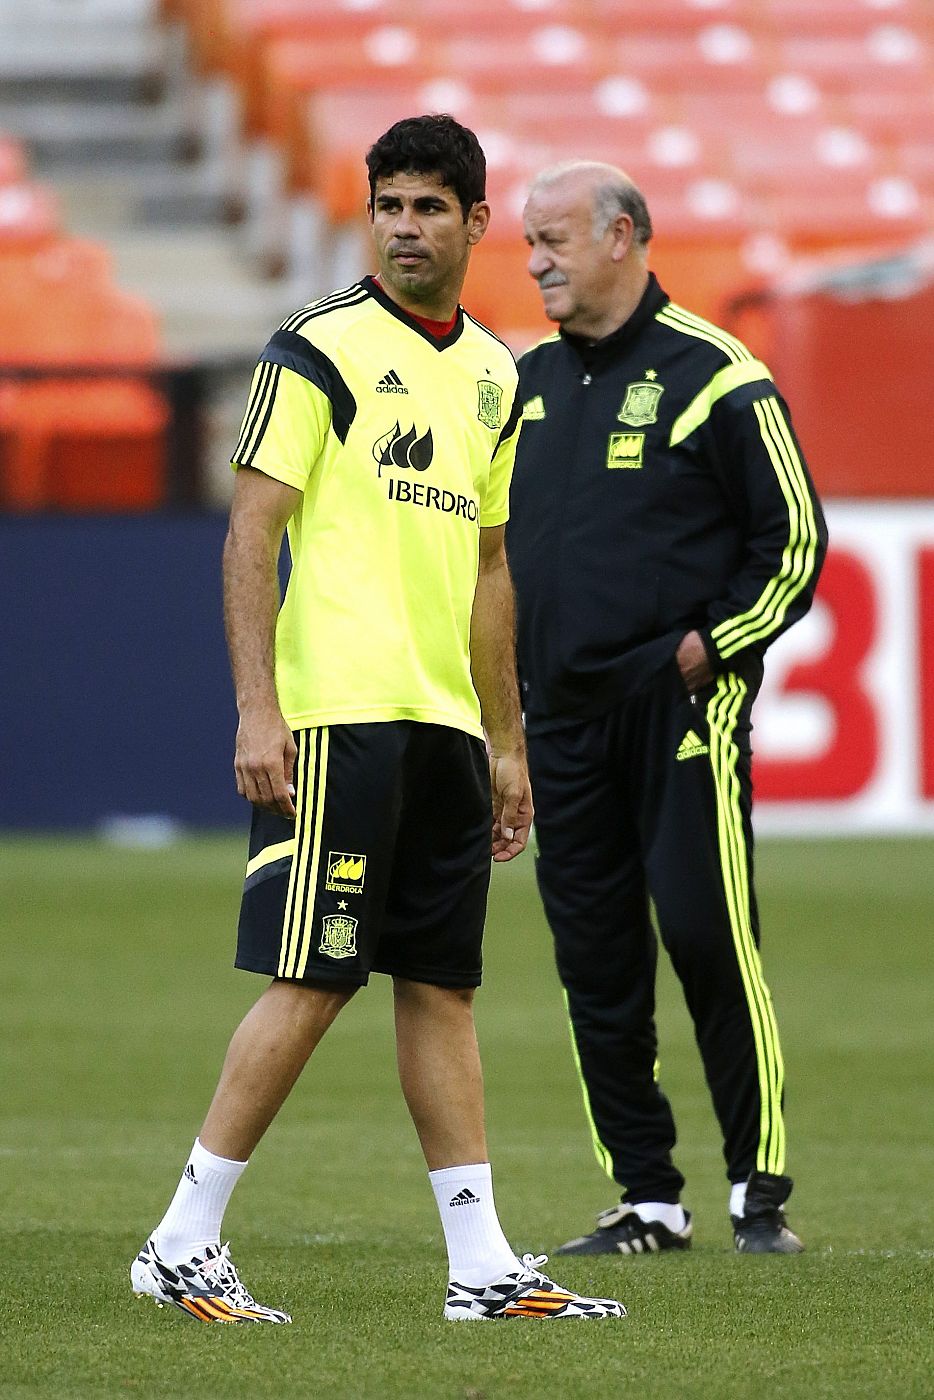 Spain's soccer player Diego Costa and head coach Vicente del Bosque participate in a soccer team training session at RFK Stadium in Washington